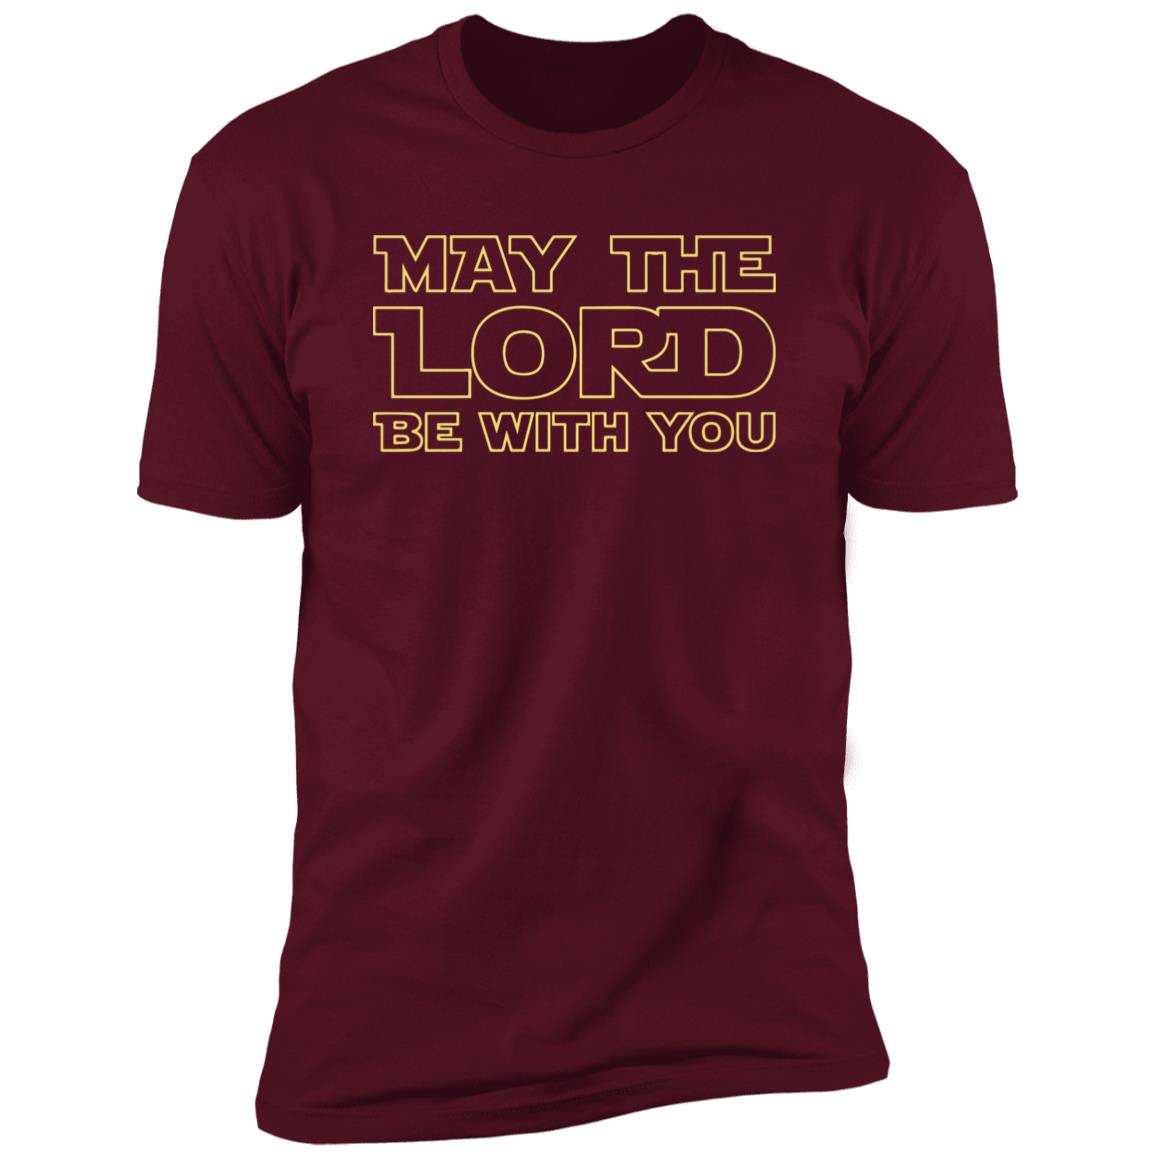 May The Lord Be With You Men's Premium Short Sleeve T-Shirt